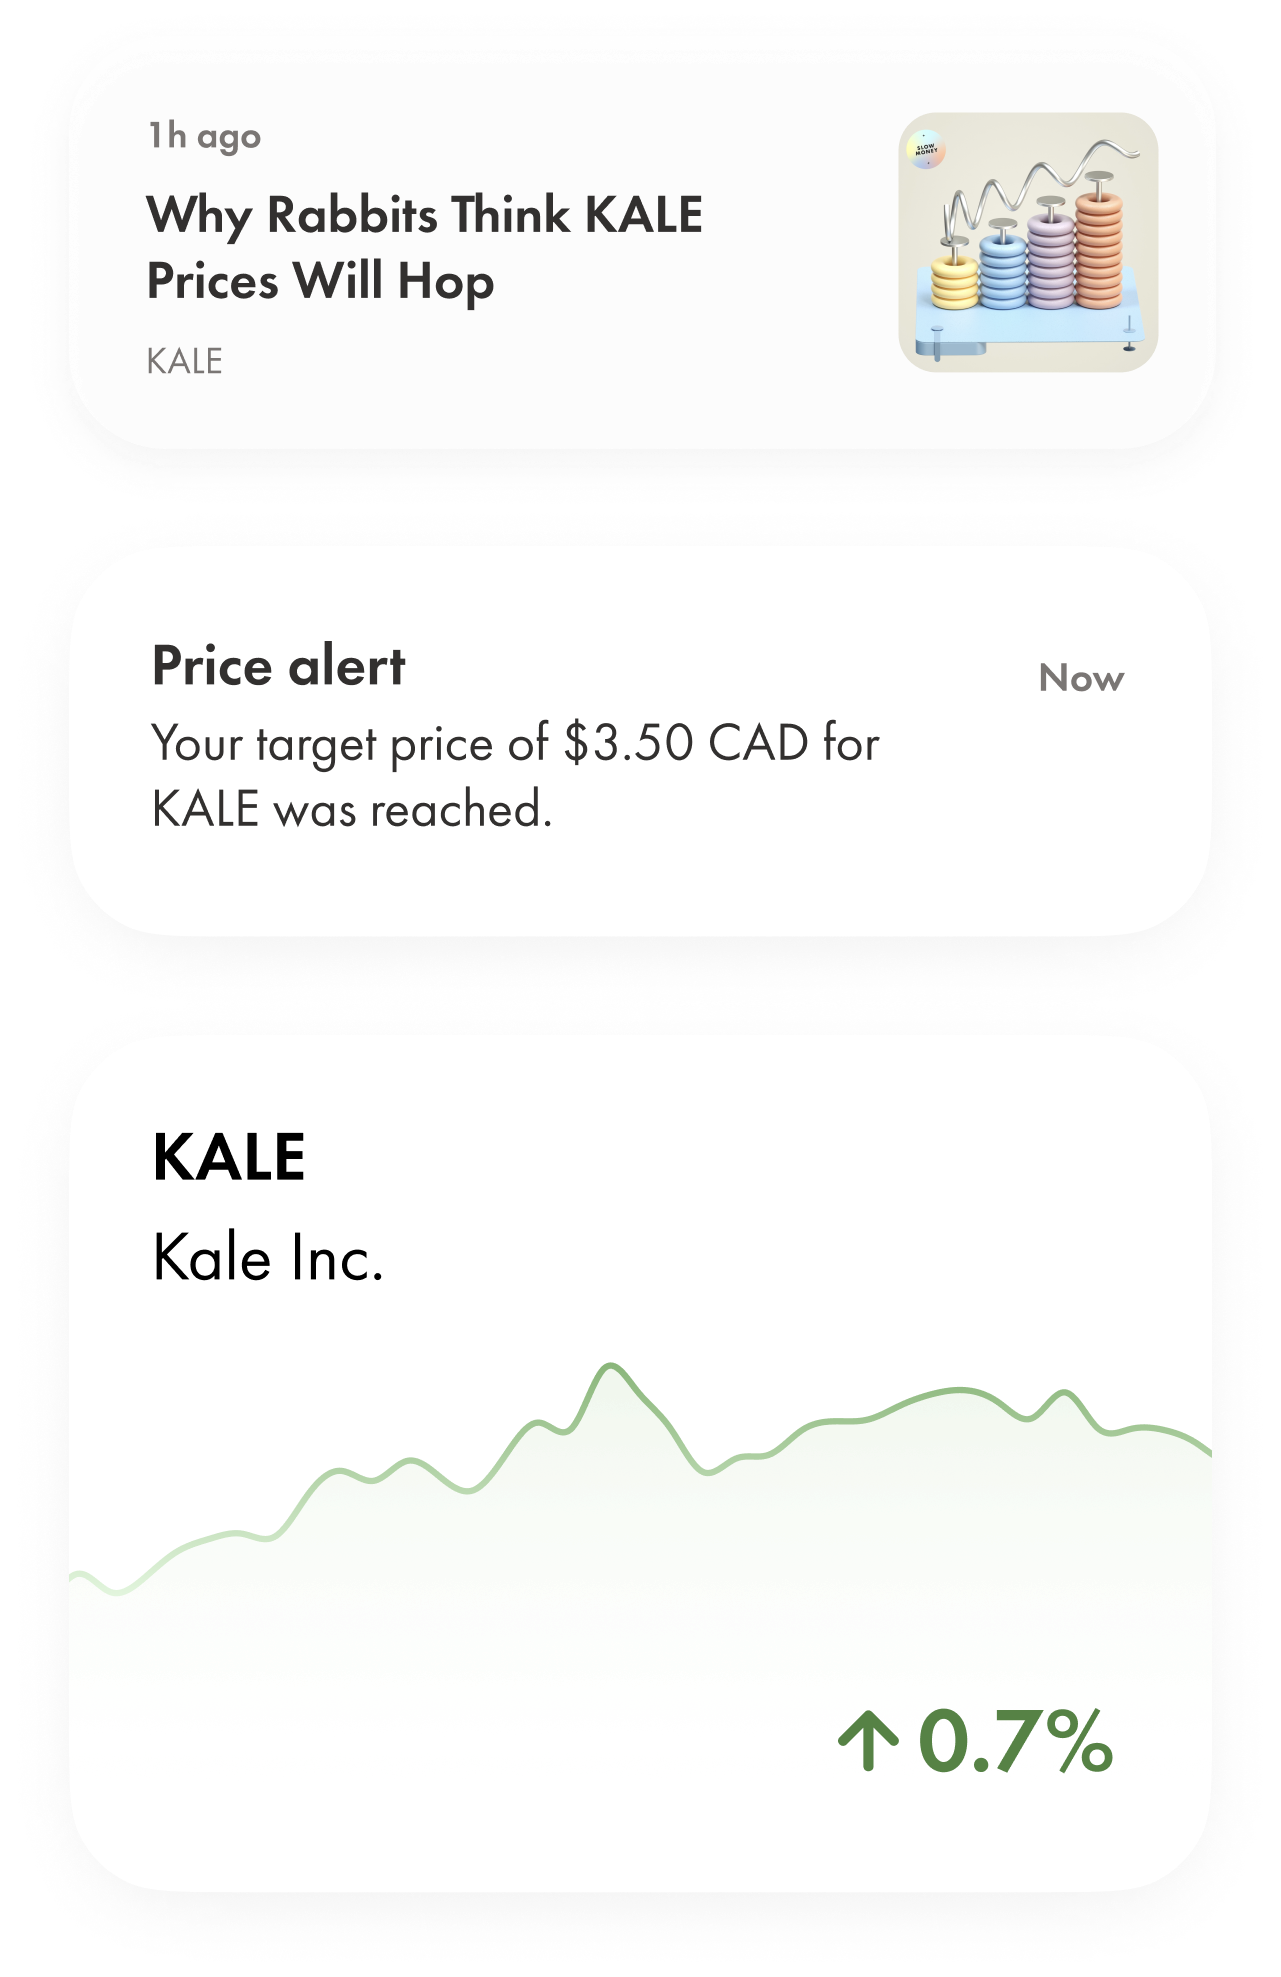 Real-time stock prices, news, and custom price alerts make sure you have all the right info to trade in the moment.